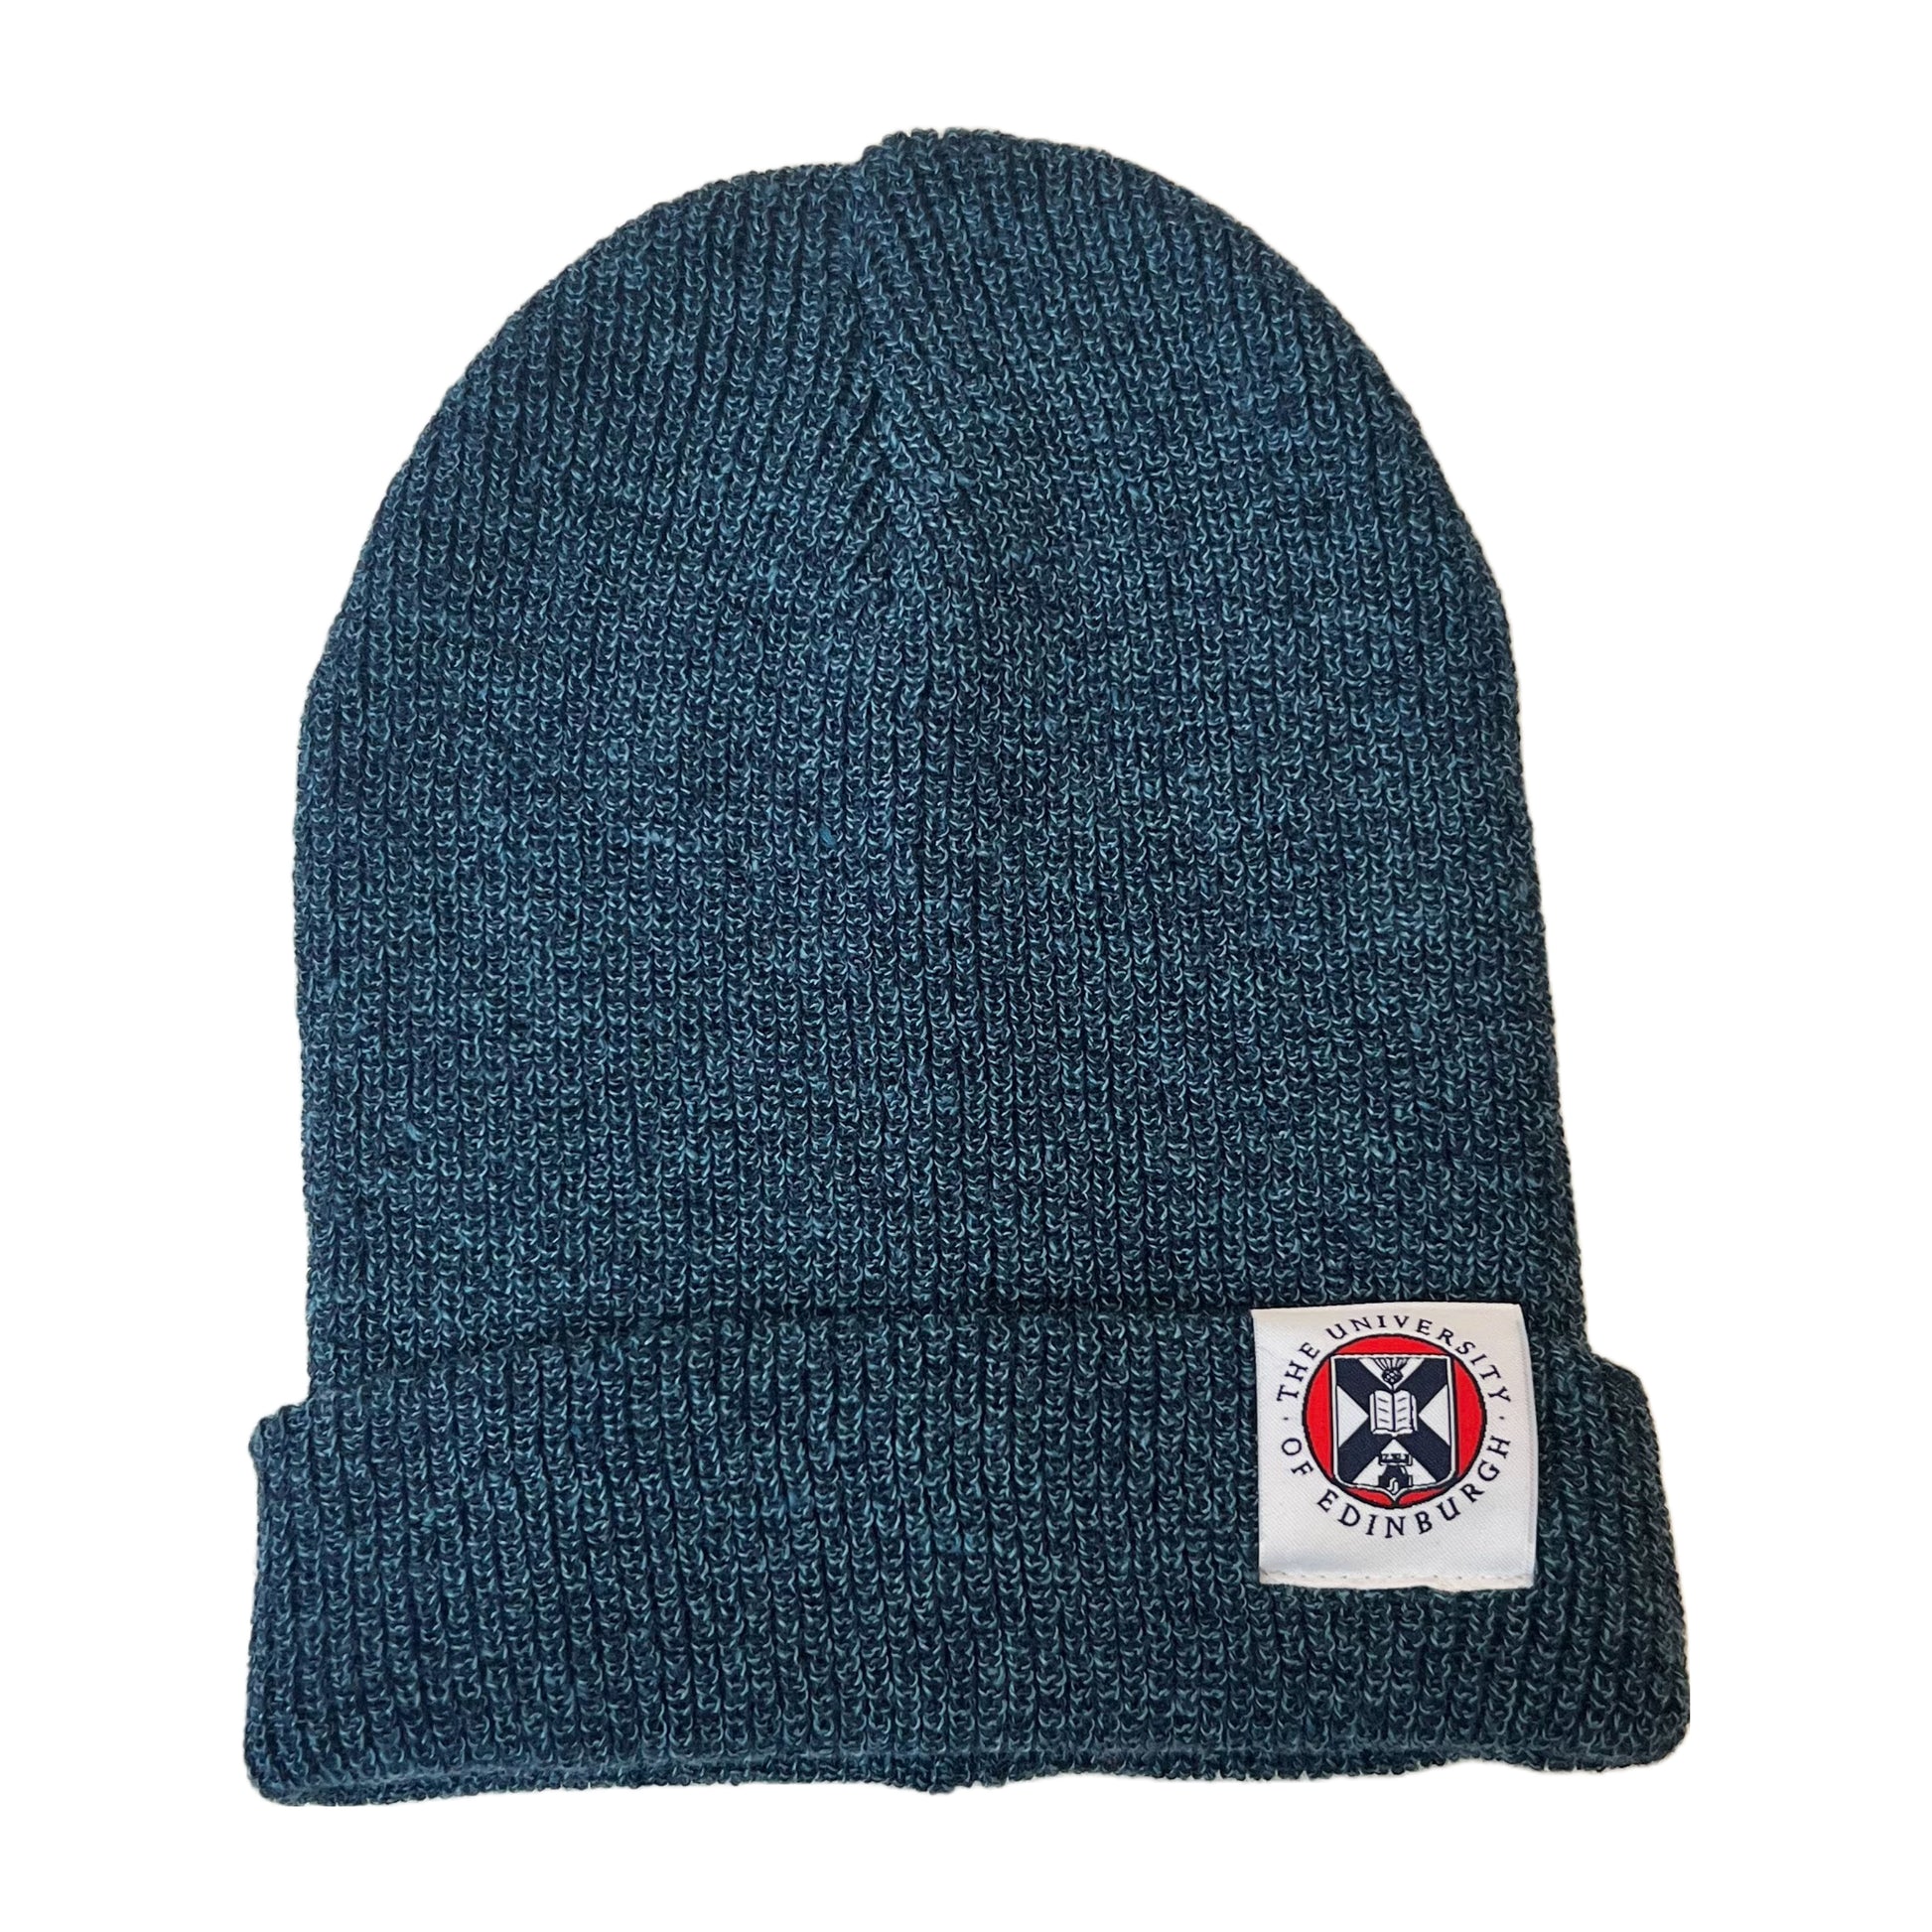 petrol blue beanies featuring woven tag with university crest